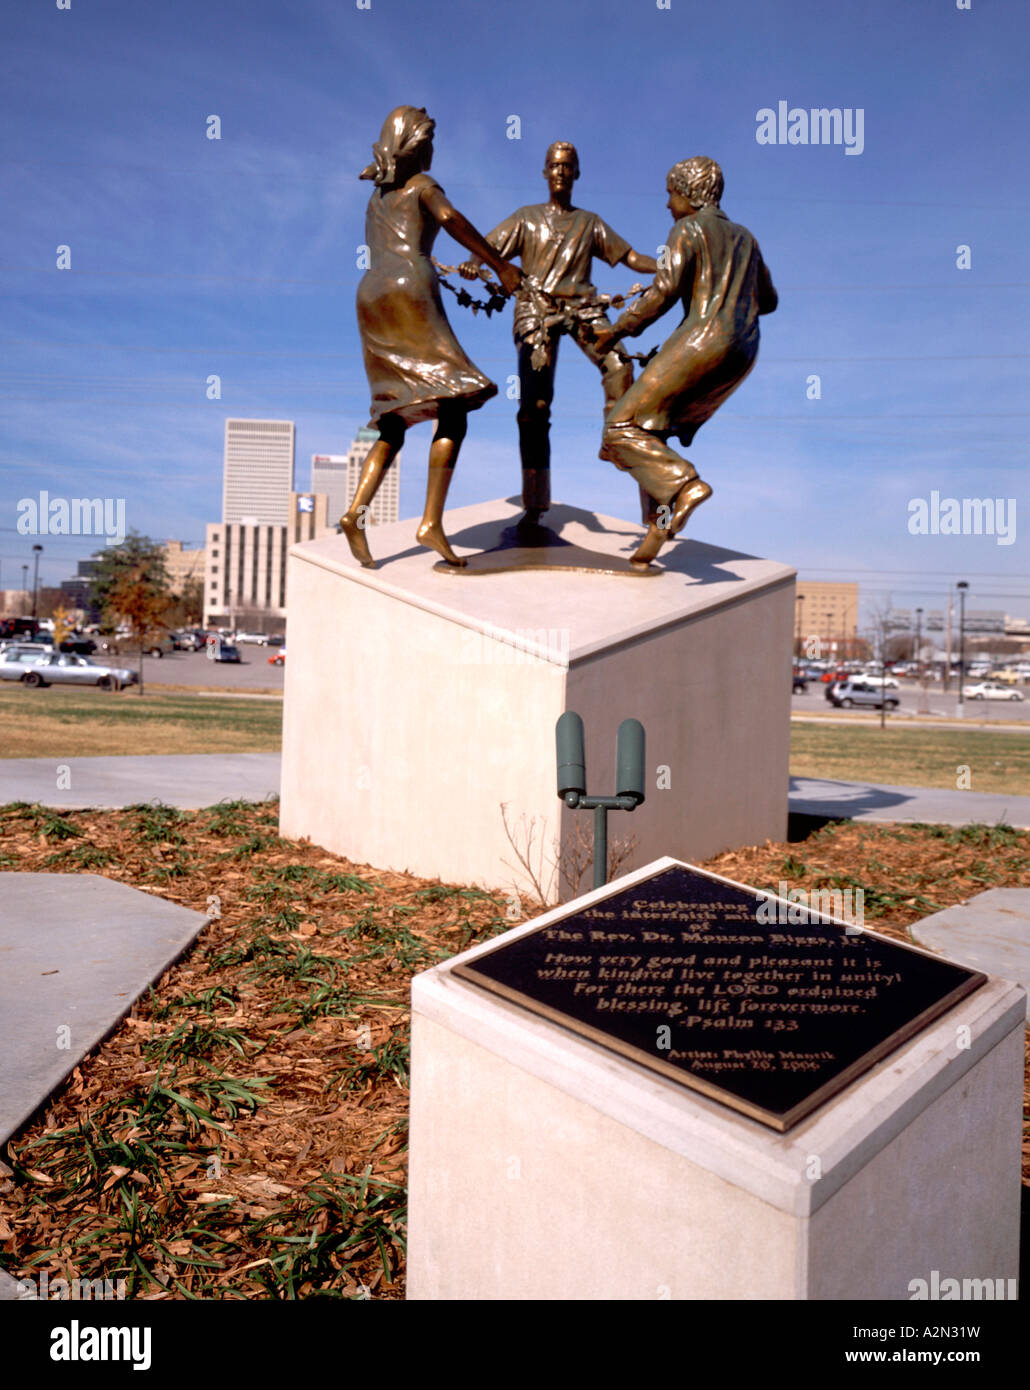 Tulsa Oklahoma.Bronze sculpture of 'kindred living together' in park outside United Methodist Church Stock Photo